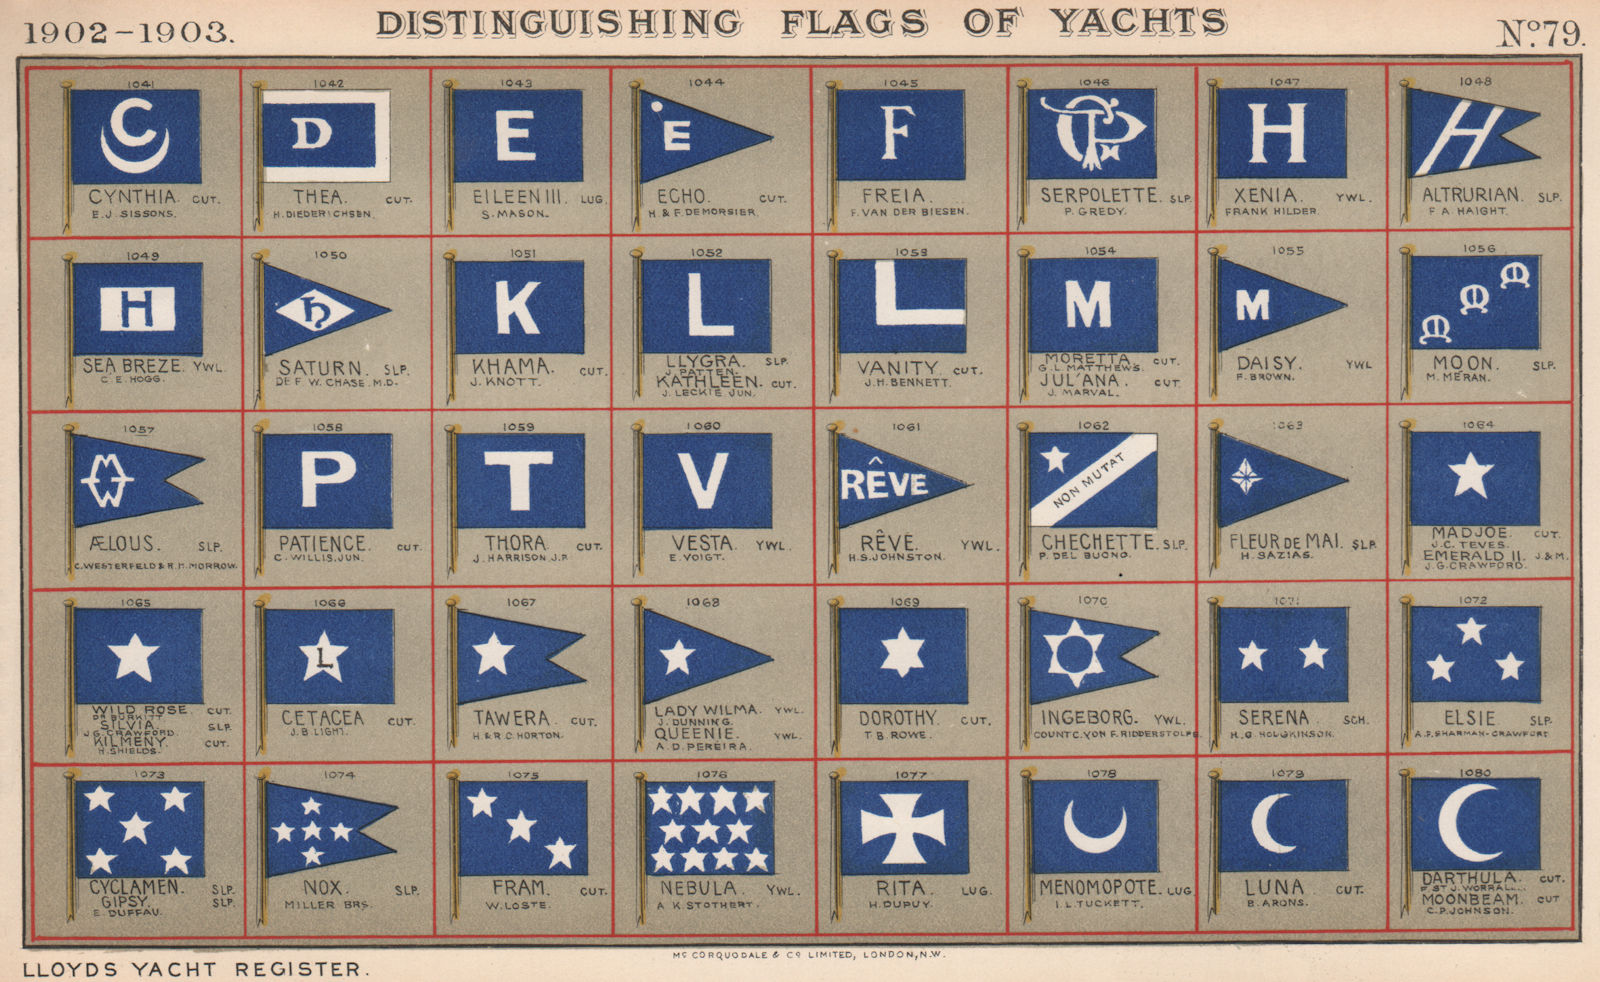 YACHT FLAGS. Blue & White (6) 1902 old antique vintage print picture